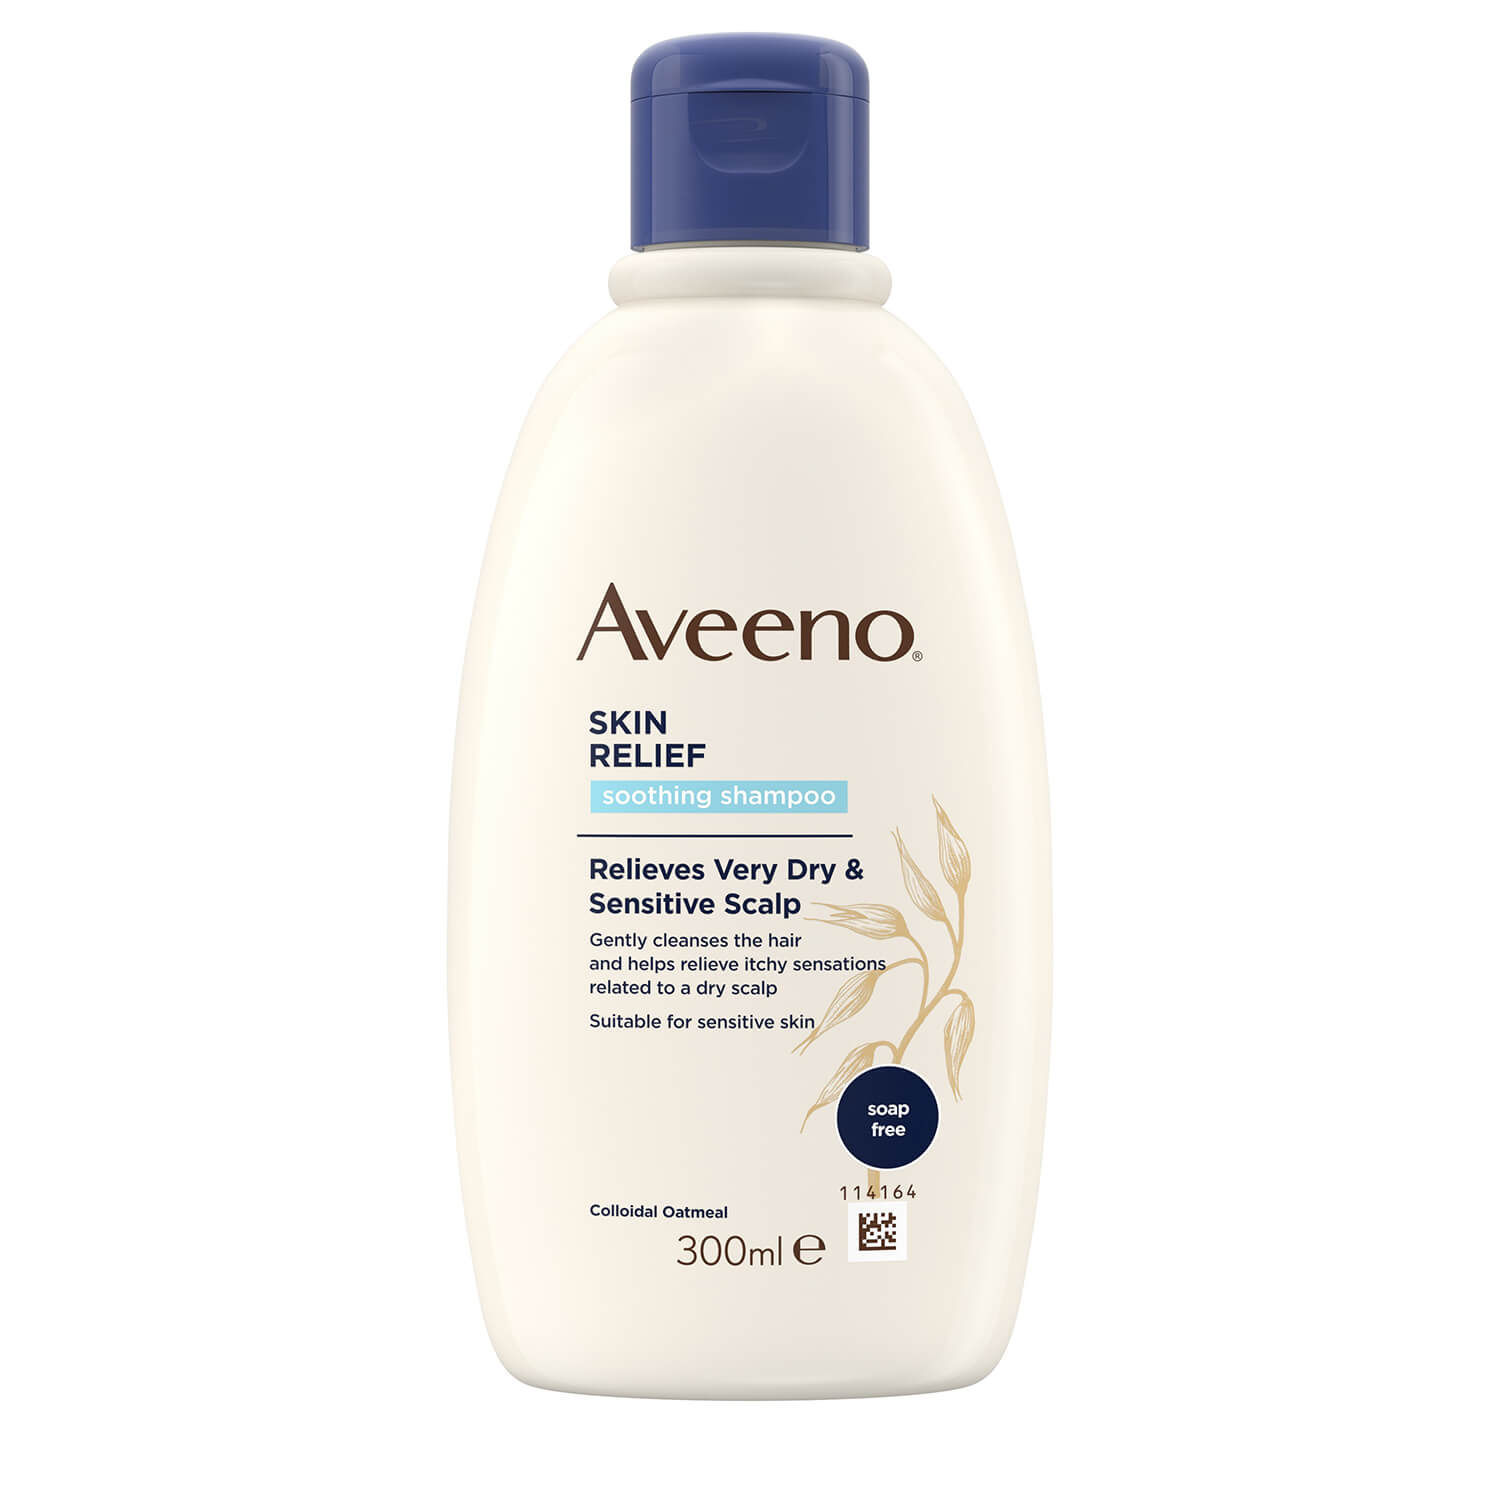 Aveeno Skin Relief Soothing Shampoo - 300ml 1 Shaws Department Stores